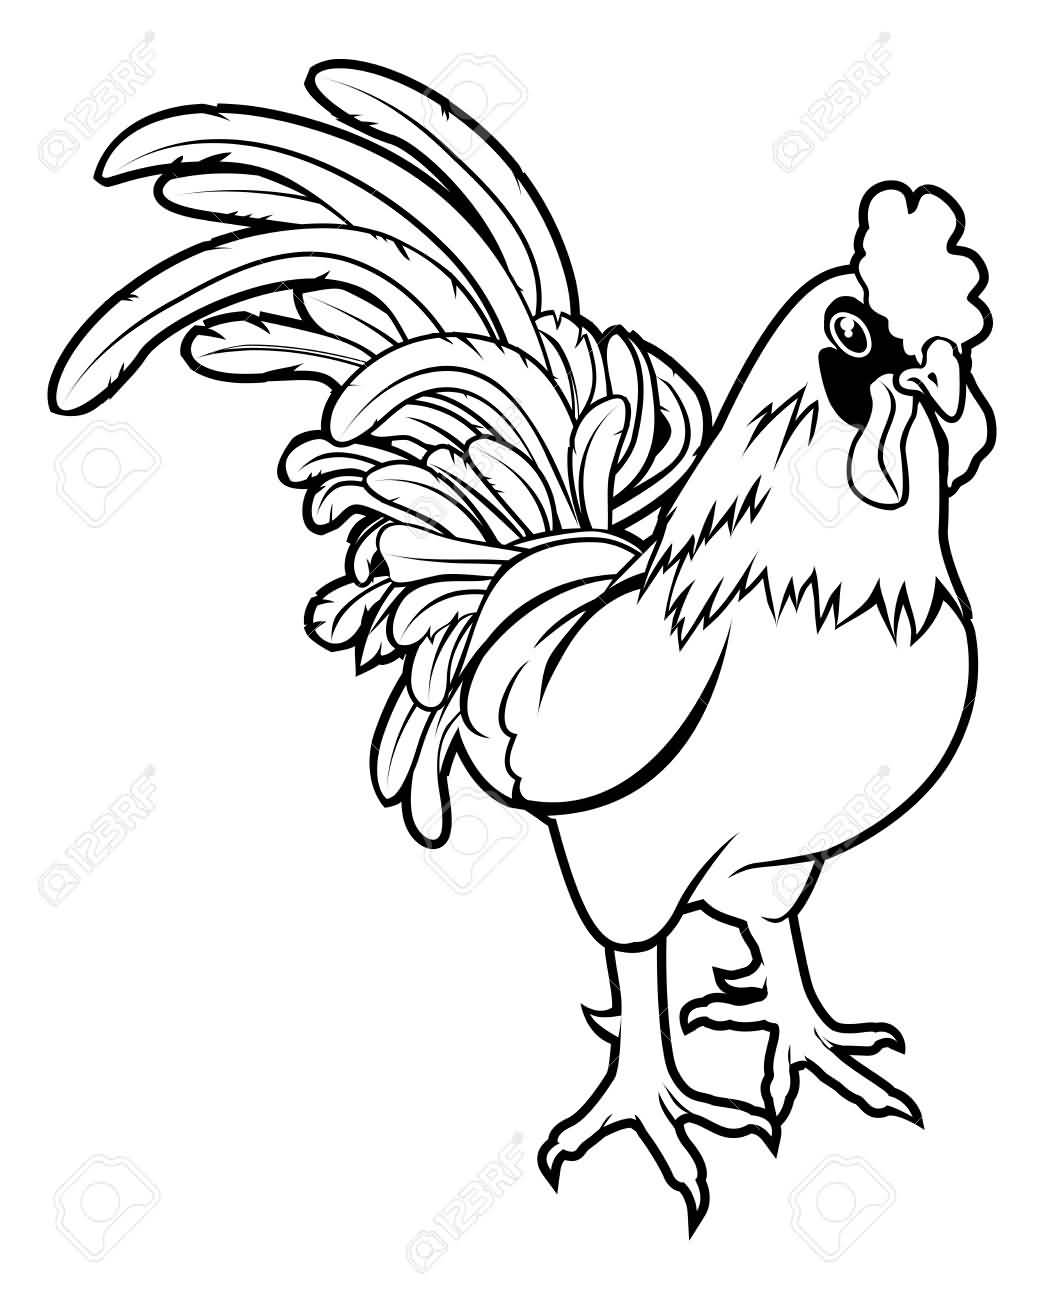 Outline Rooster Tattoo Design